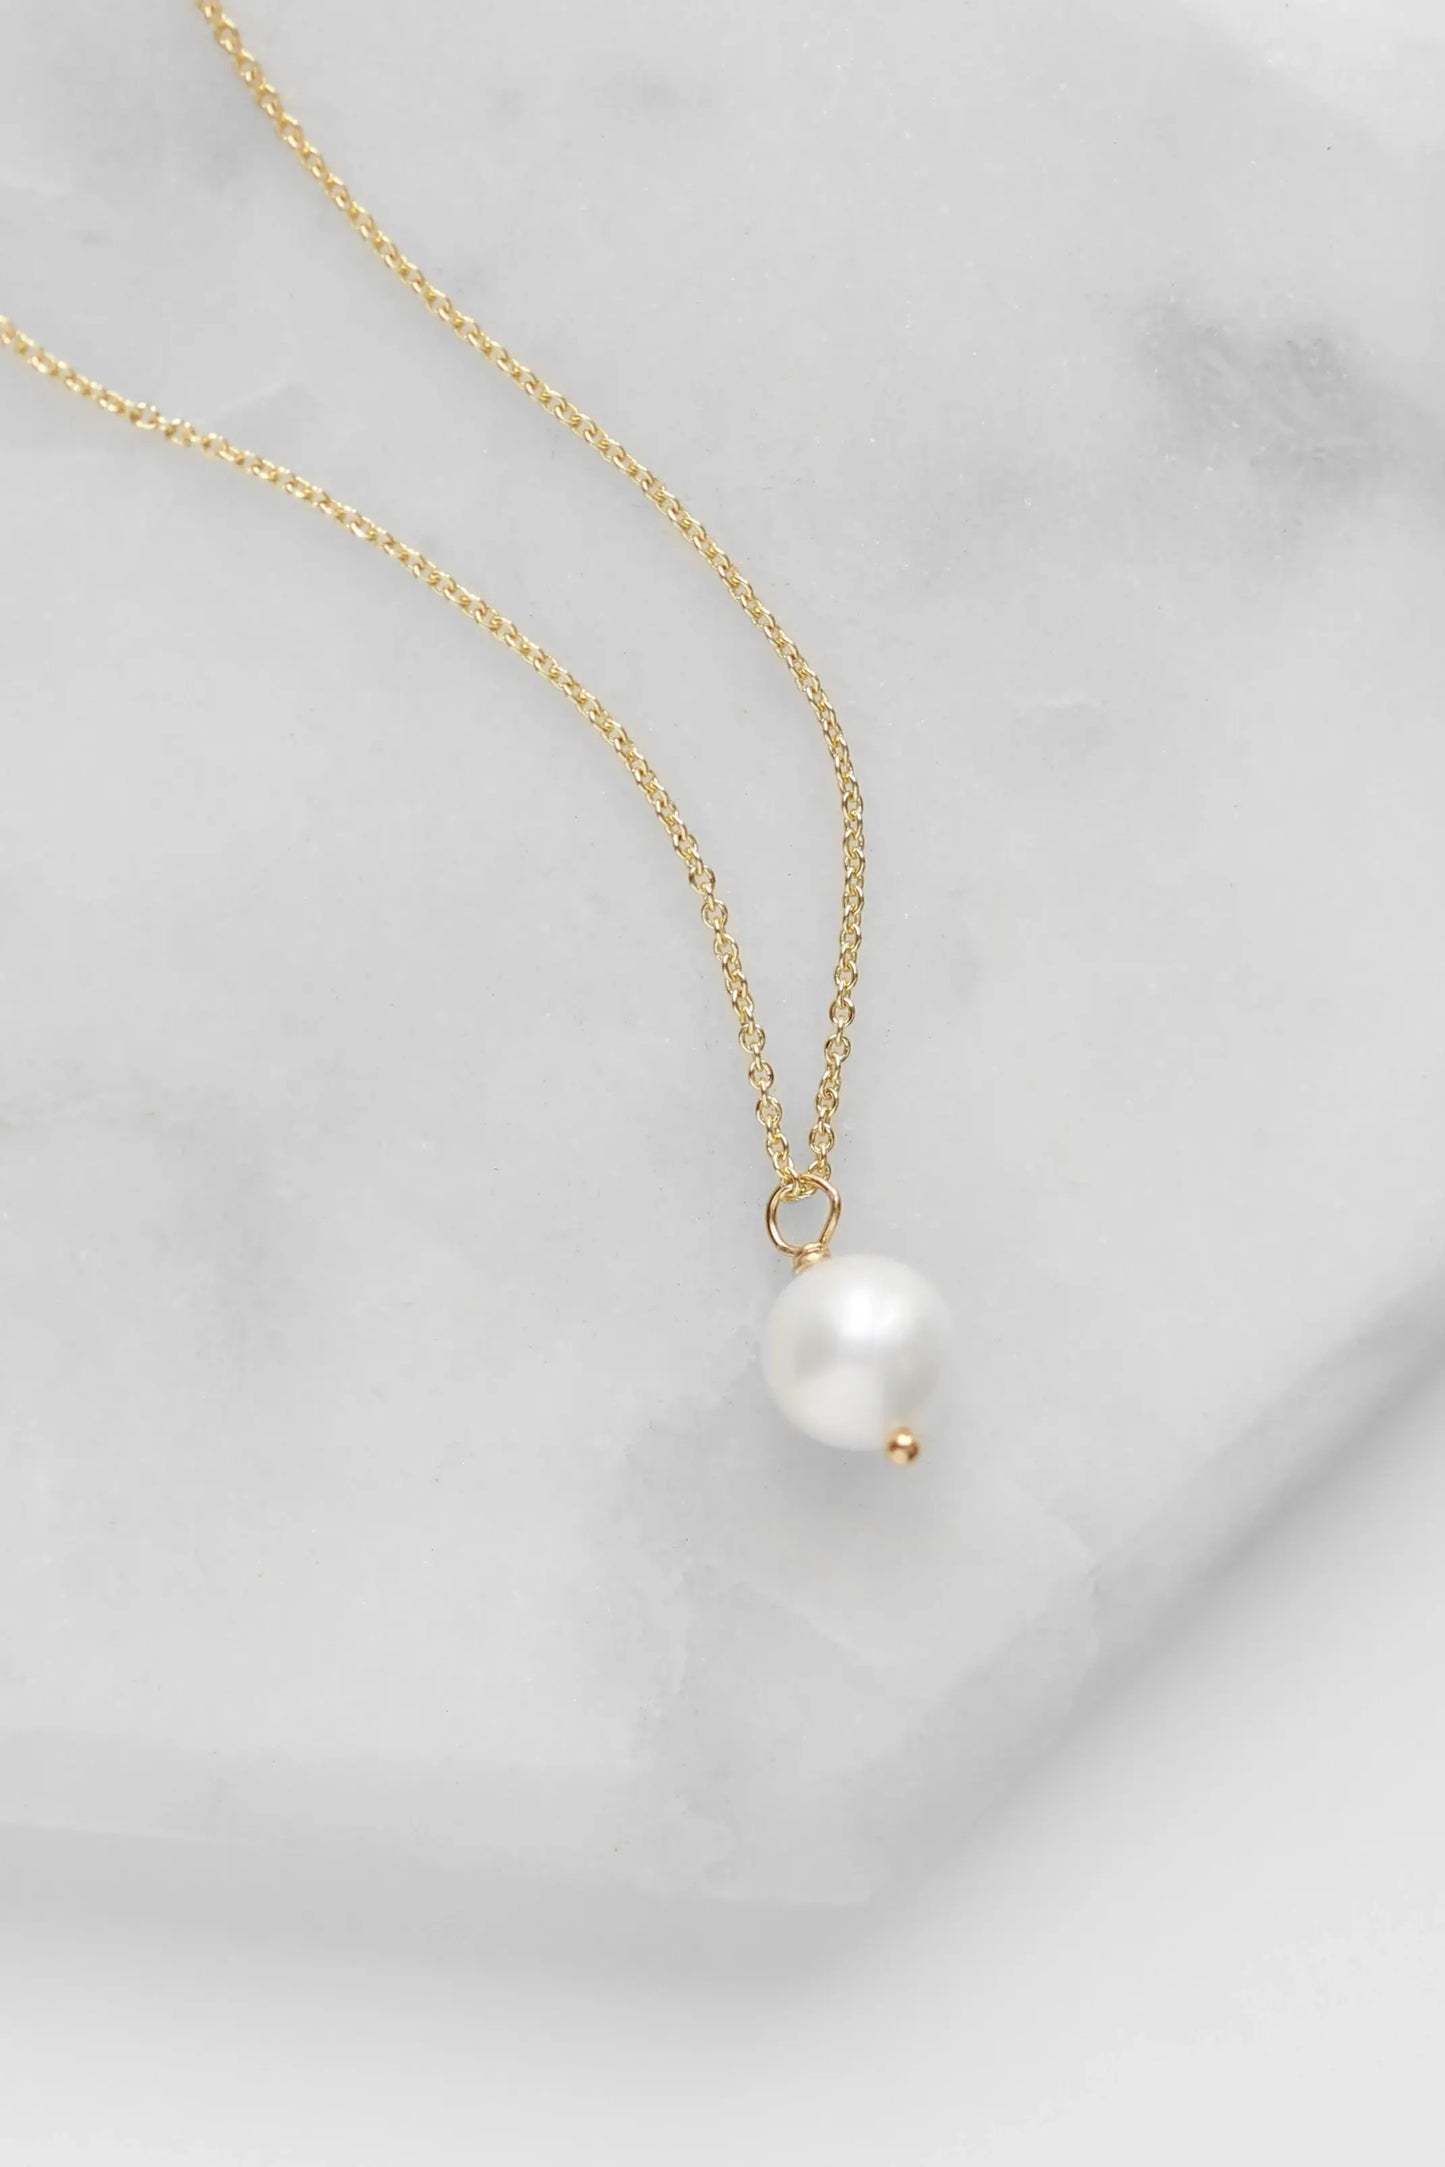 The    Ivory Pearl Necklace by  Francesca Jewellery from the Necklaces Collection.